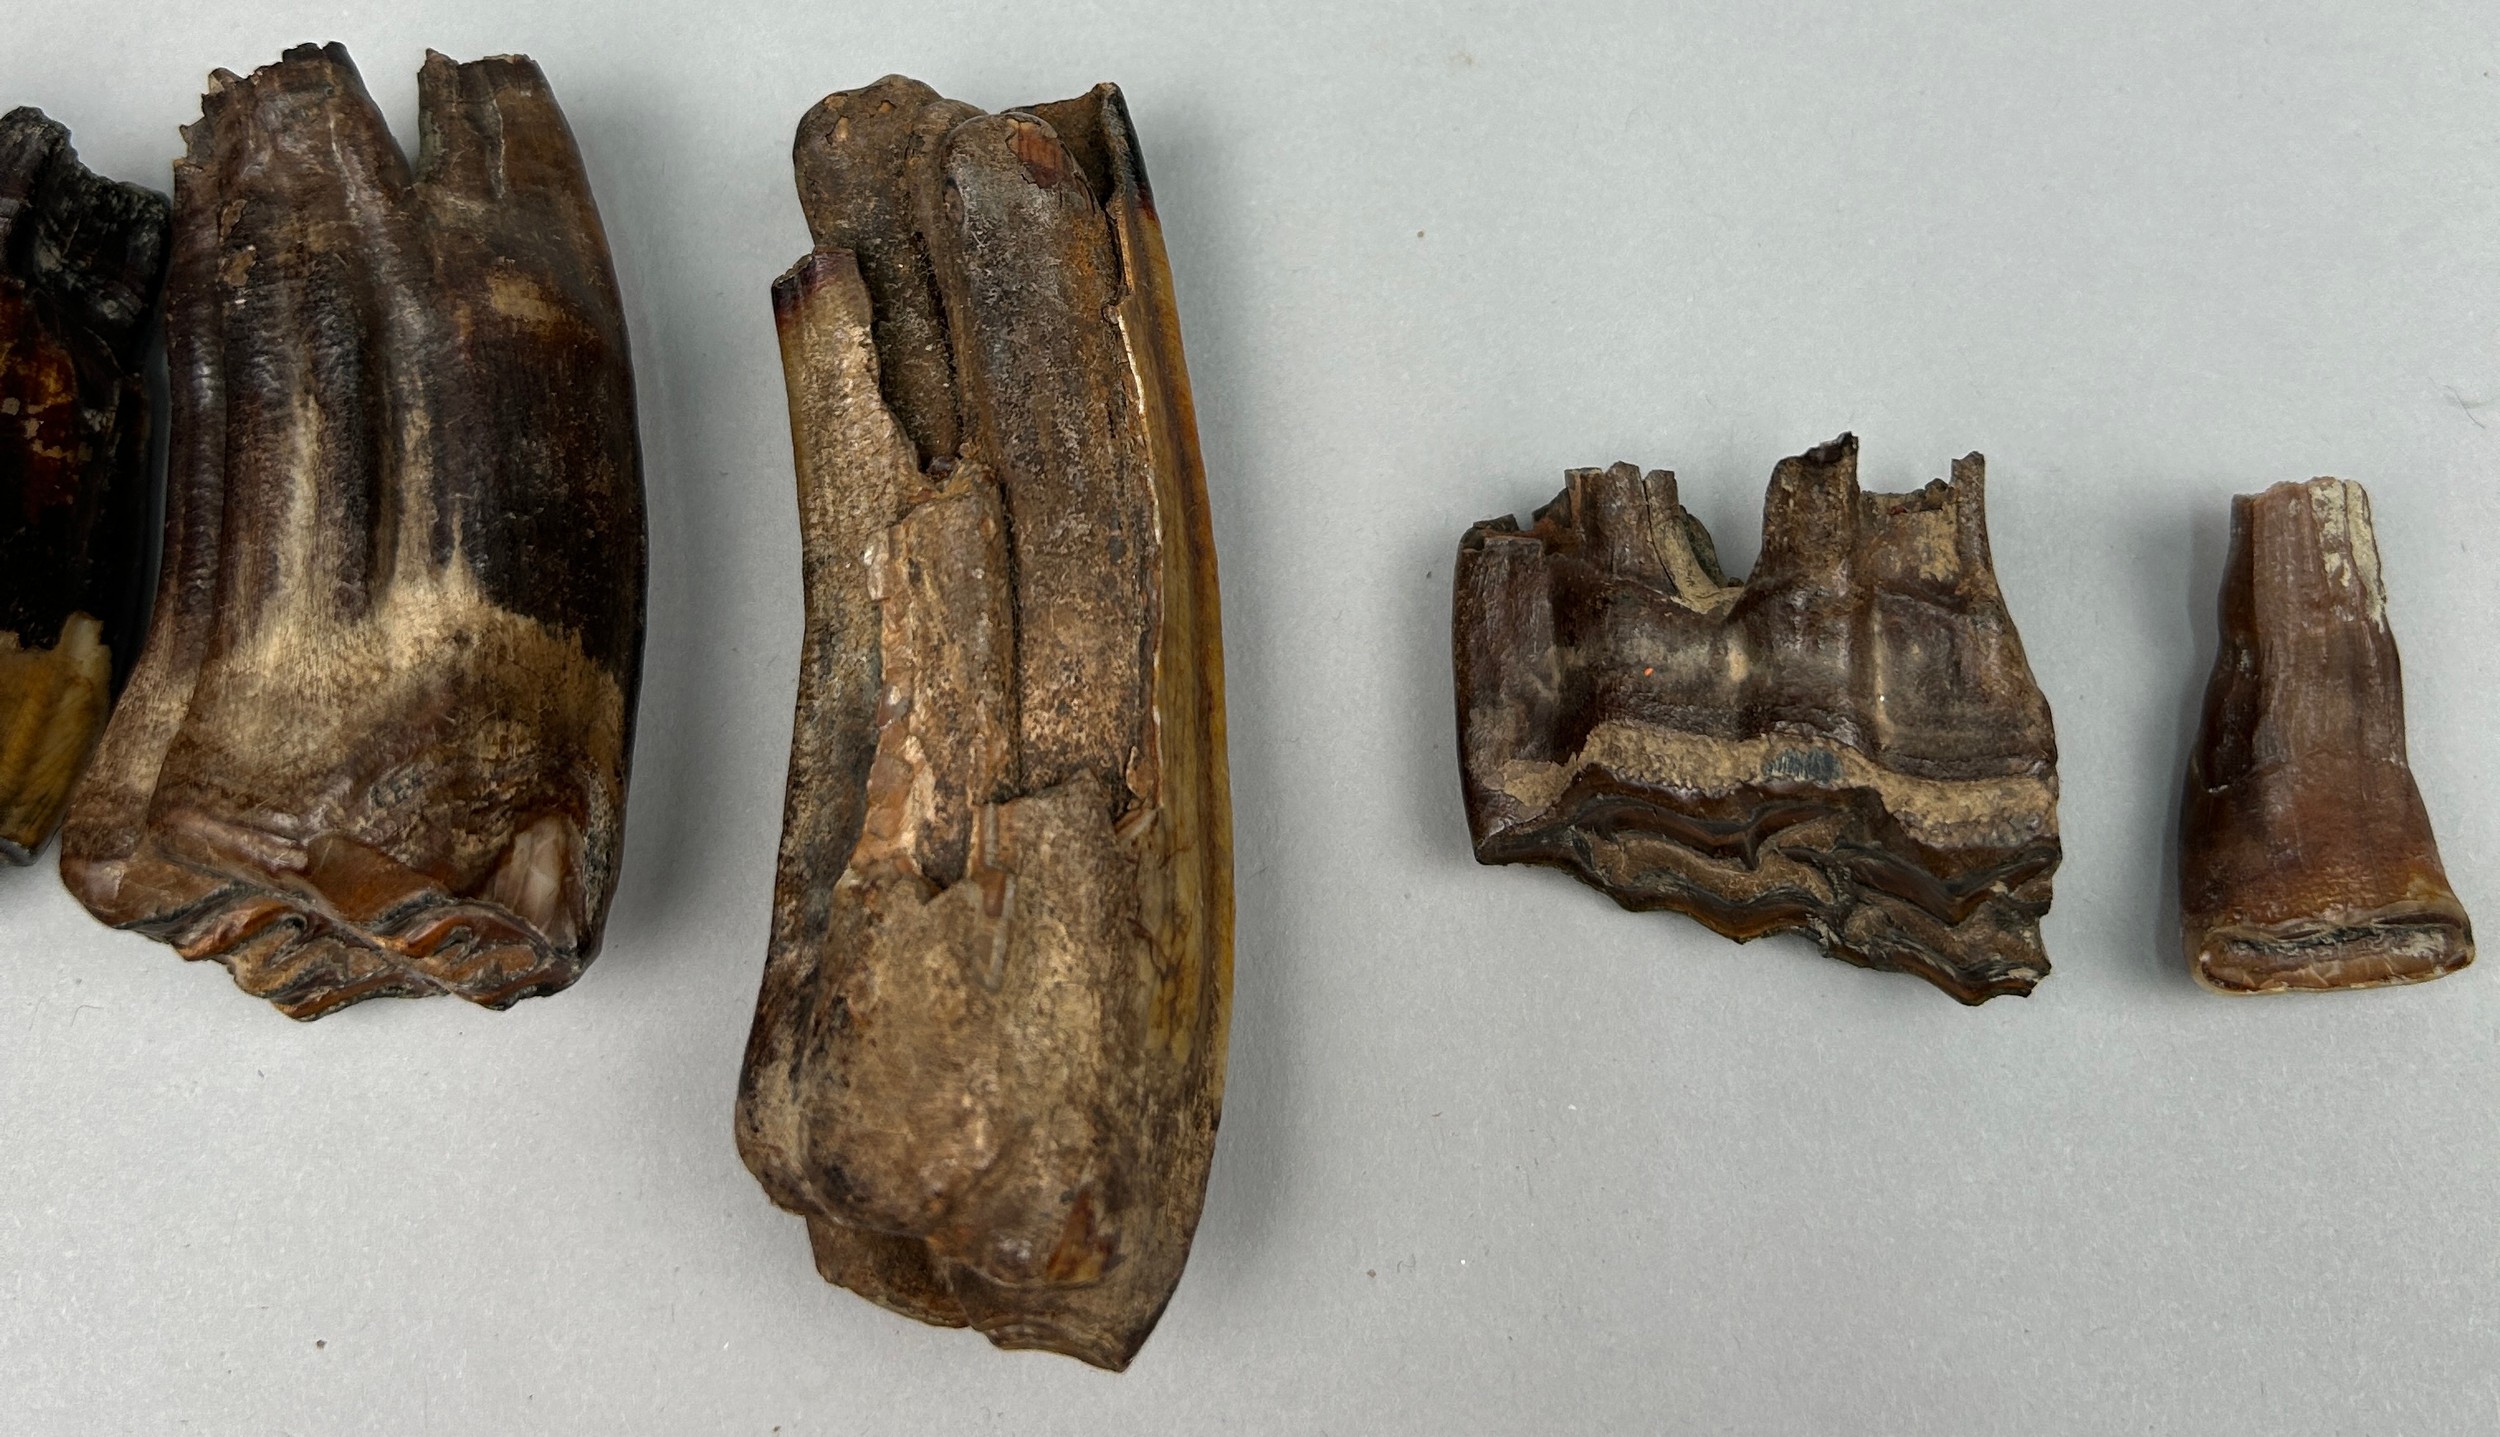 A COLLECTION OF PROBABLY BRONZE AGE PARTIALLY FOSSILISED HORSE TEETH ALONG WITH TWO HUMAN TEETH IN A - Image 4 of 5